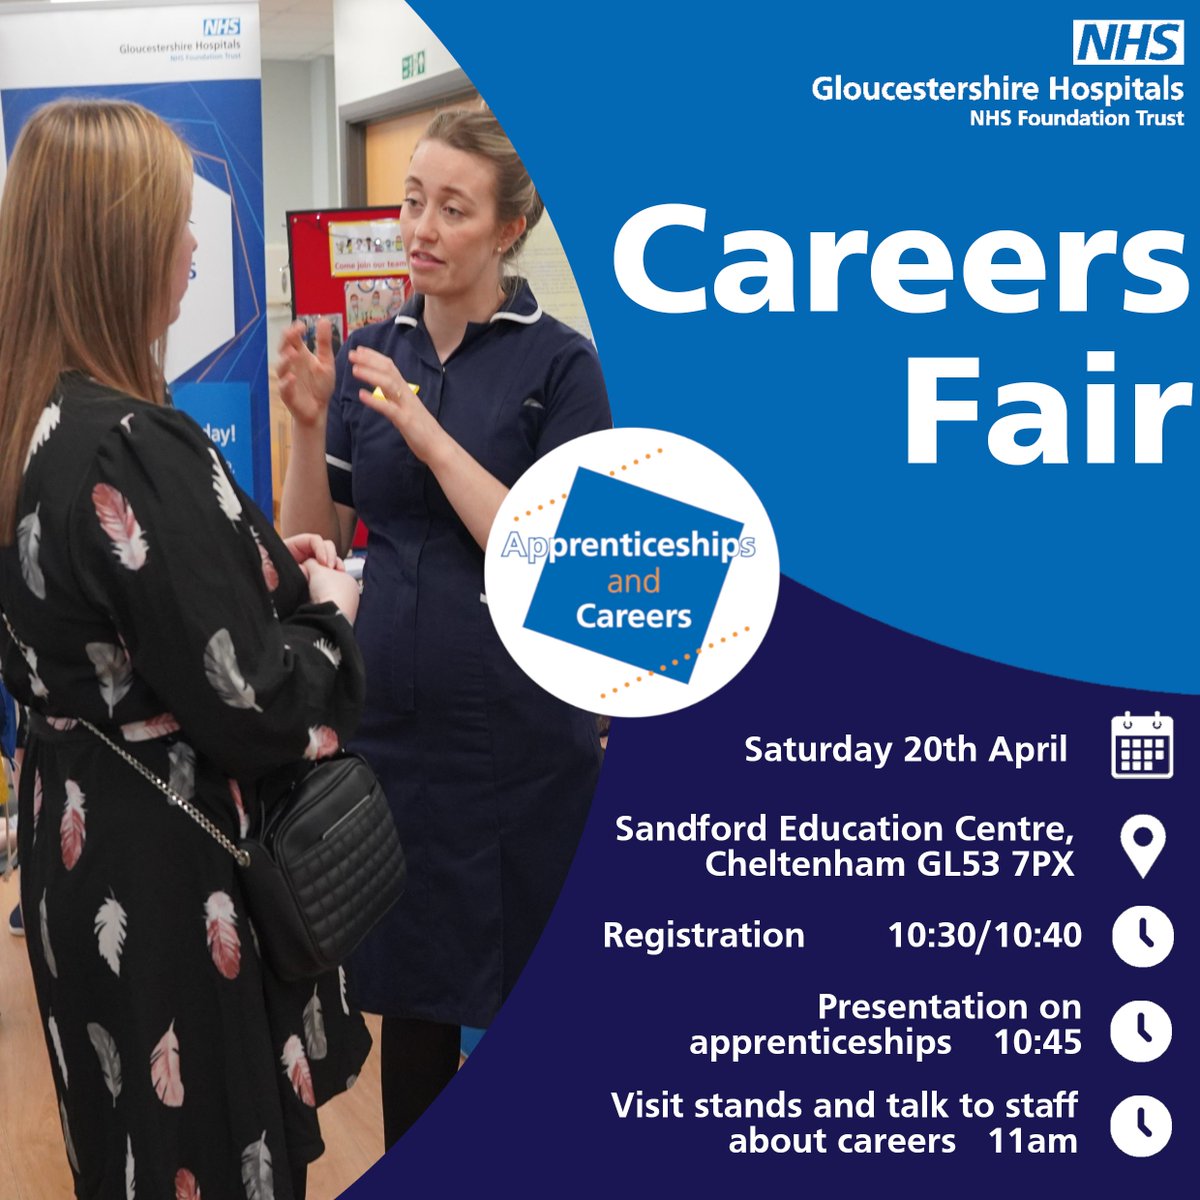 ❗️ @gloshospitals doesn’t just consist of doctors and nurses. 🔍Find out more about the #350careers you could go into within our trust at our #careers event on the 20th April at Sandford Education Centre. #CareersDay #CareersFamily #SkillsforLIfe #StepintotheNHS #WearetheNHS